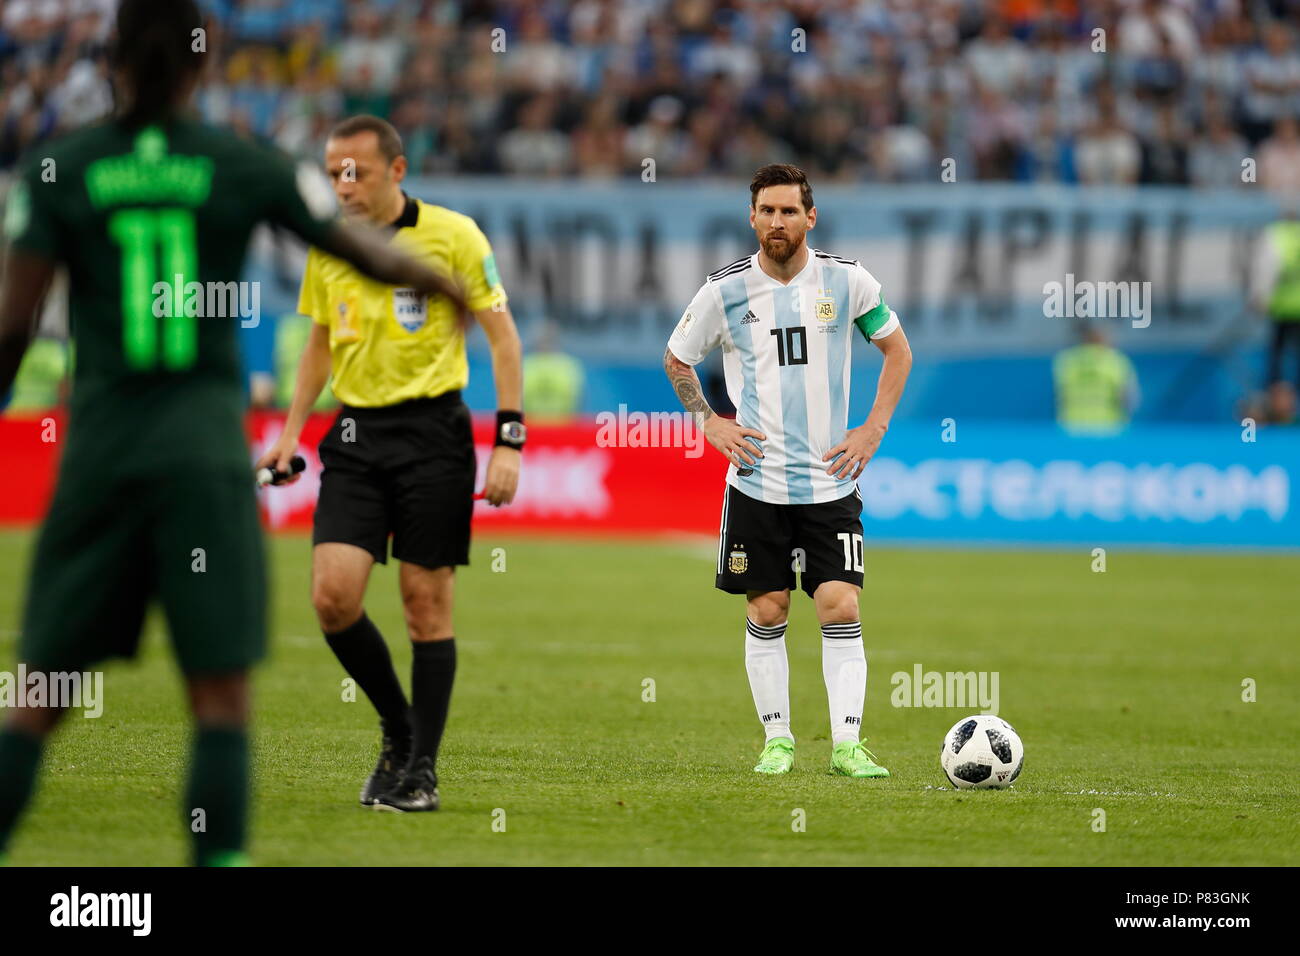 Saint Petersburg, Russia. 26th June, 2018. Lionel Messi (ARG) Football/Soccer : FIFA World Cup Russia 2018 match between Nigeria 1-2 Argentina at the Saint Petersburg Stadium in Saint Petersburg, Russia . Credit: Mutsu KAWAMORI/AFLO/Alamy Live News Stock Photo